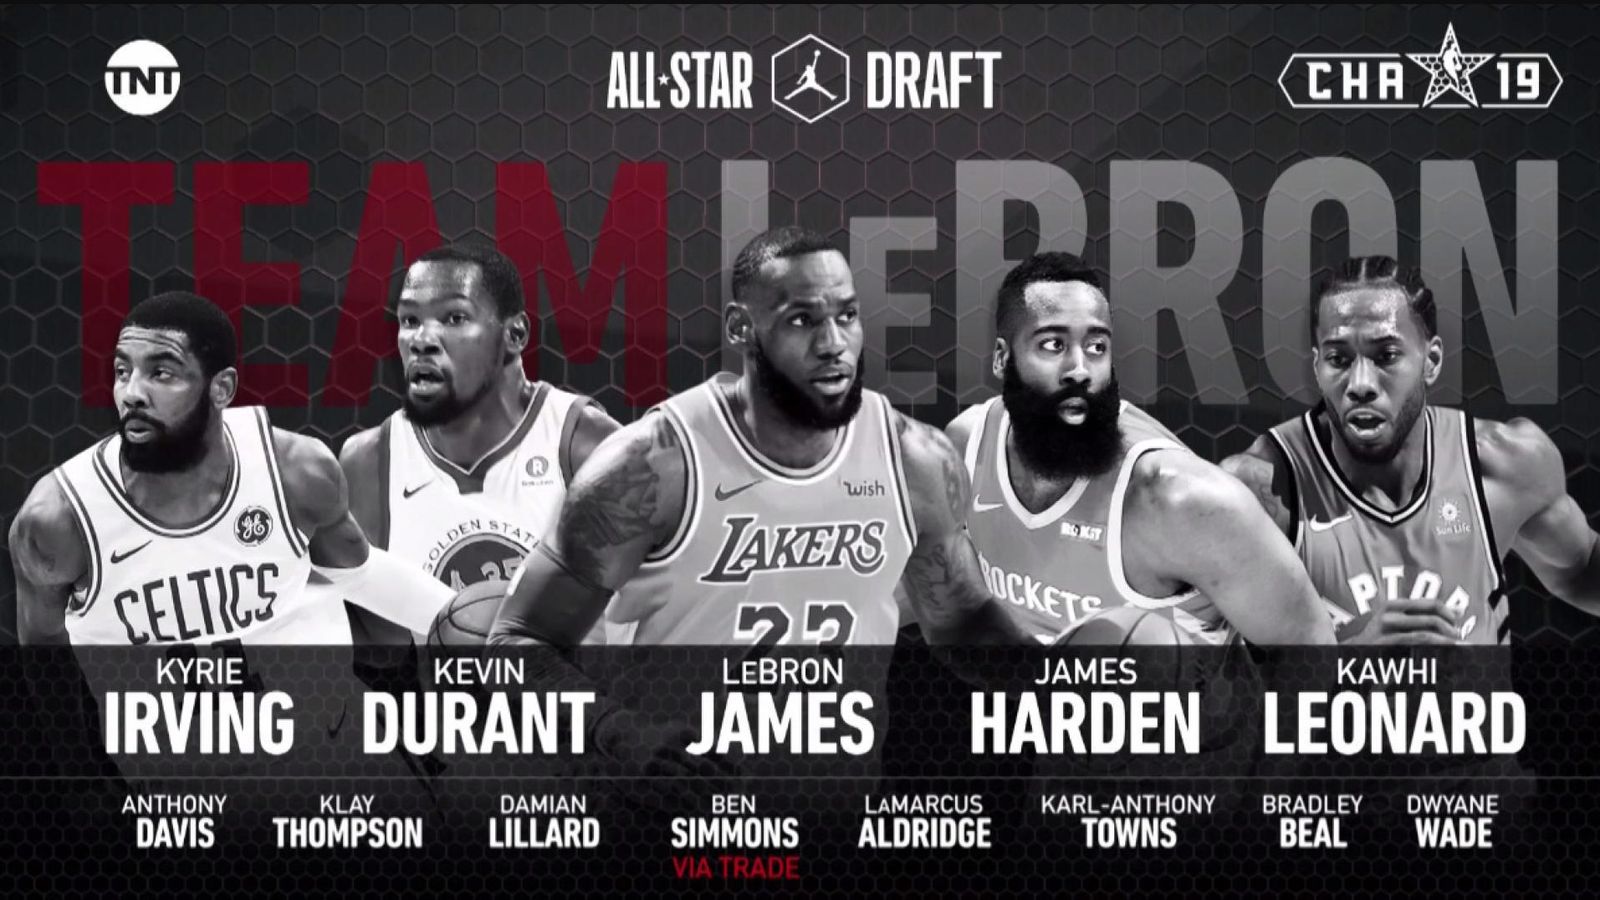 2019 NBA All-Star Game: League to televise draft